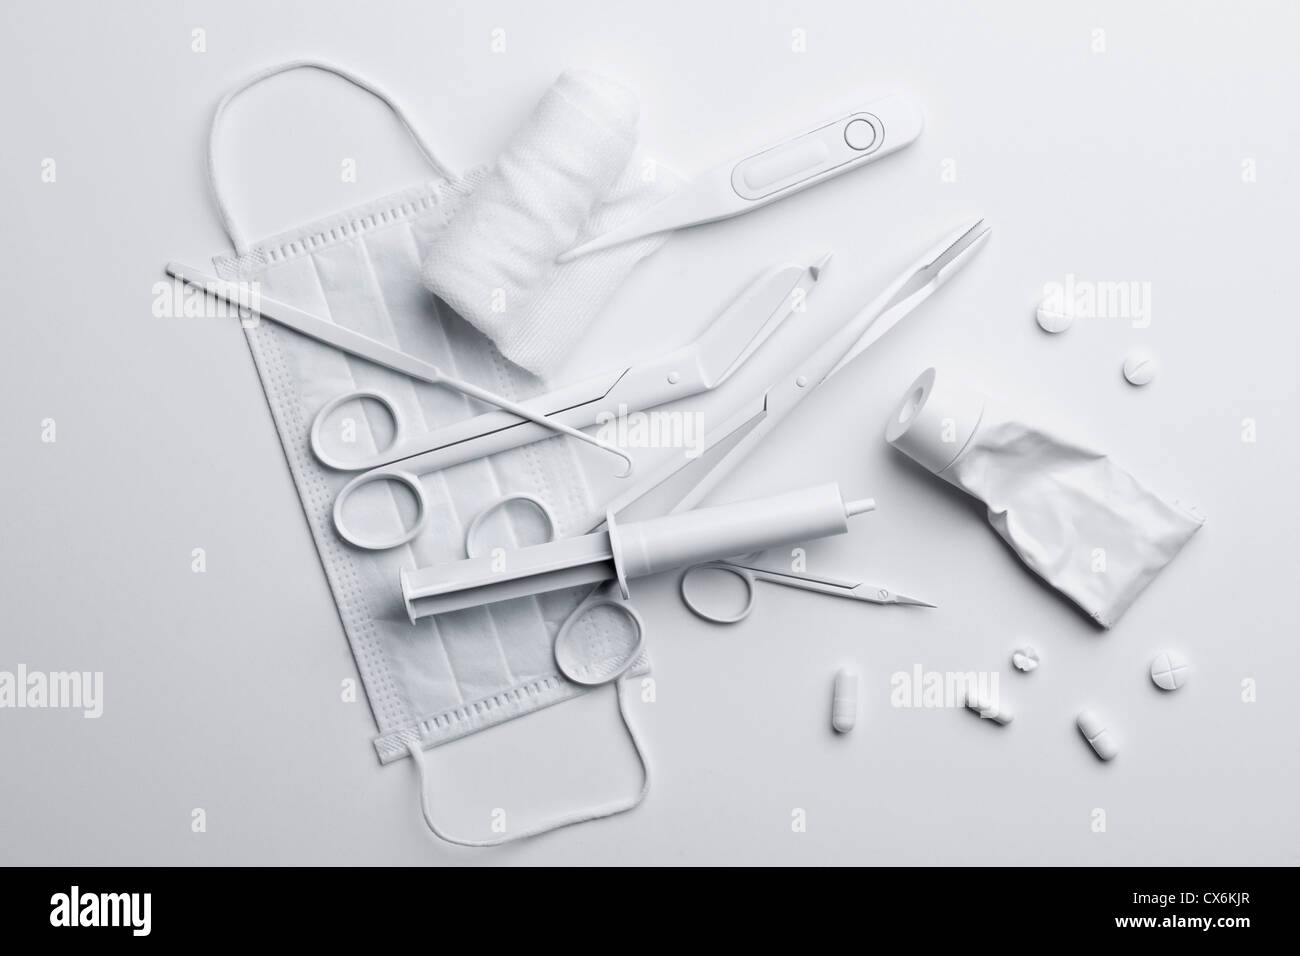 Medicine and medical equipment painted white and scattered on a white surface Stock Photo